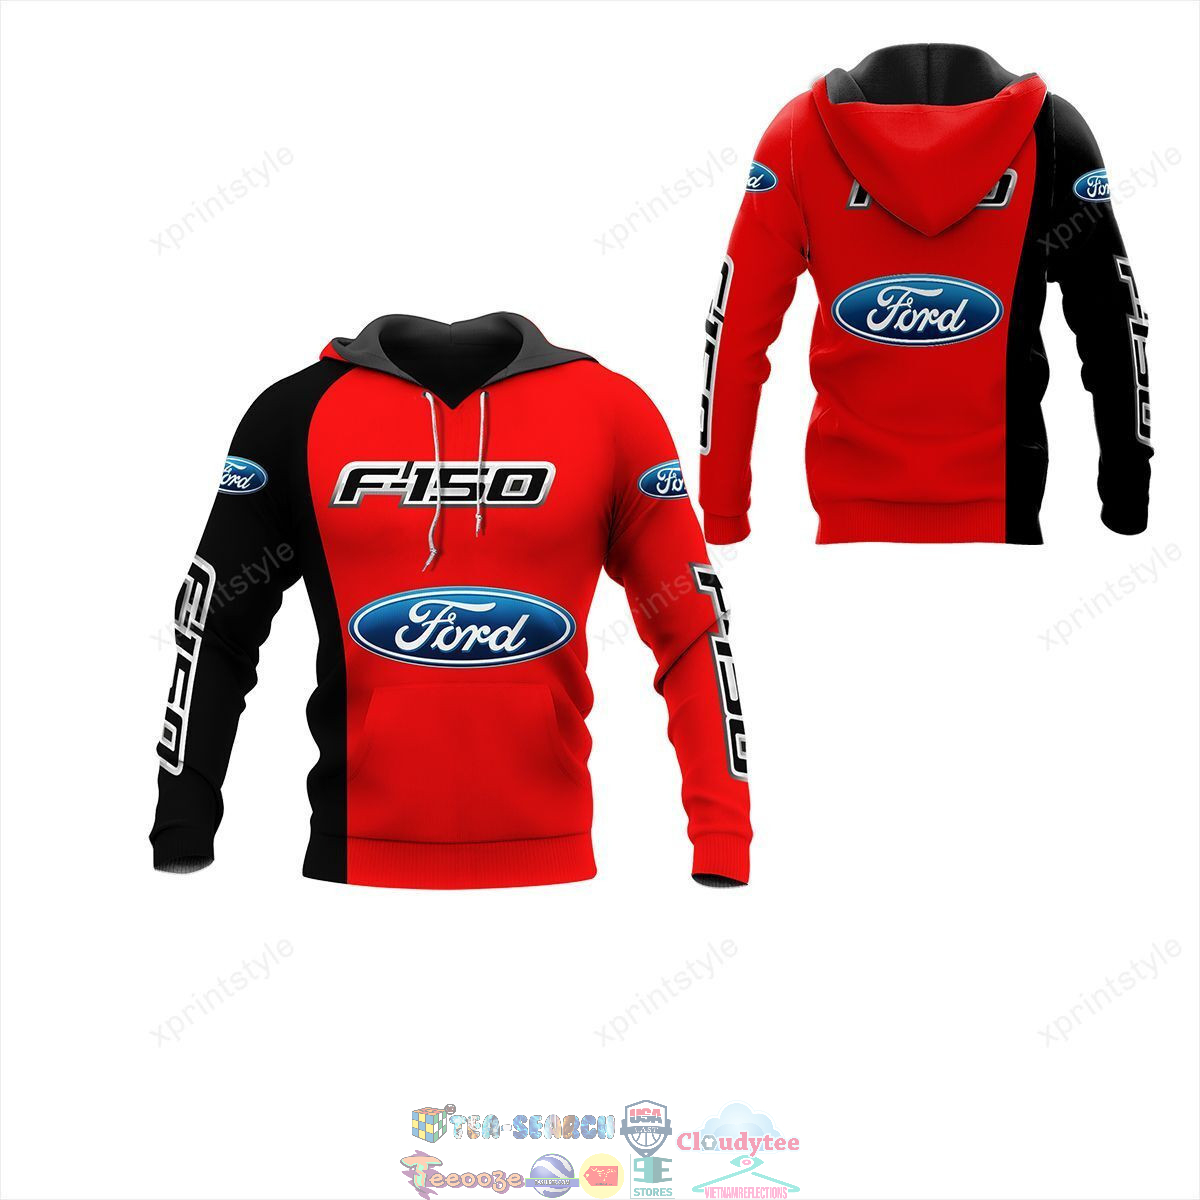 Ford F150 ver 11 hoodie and t-shirt – Saleoff